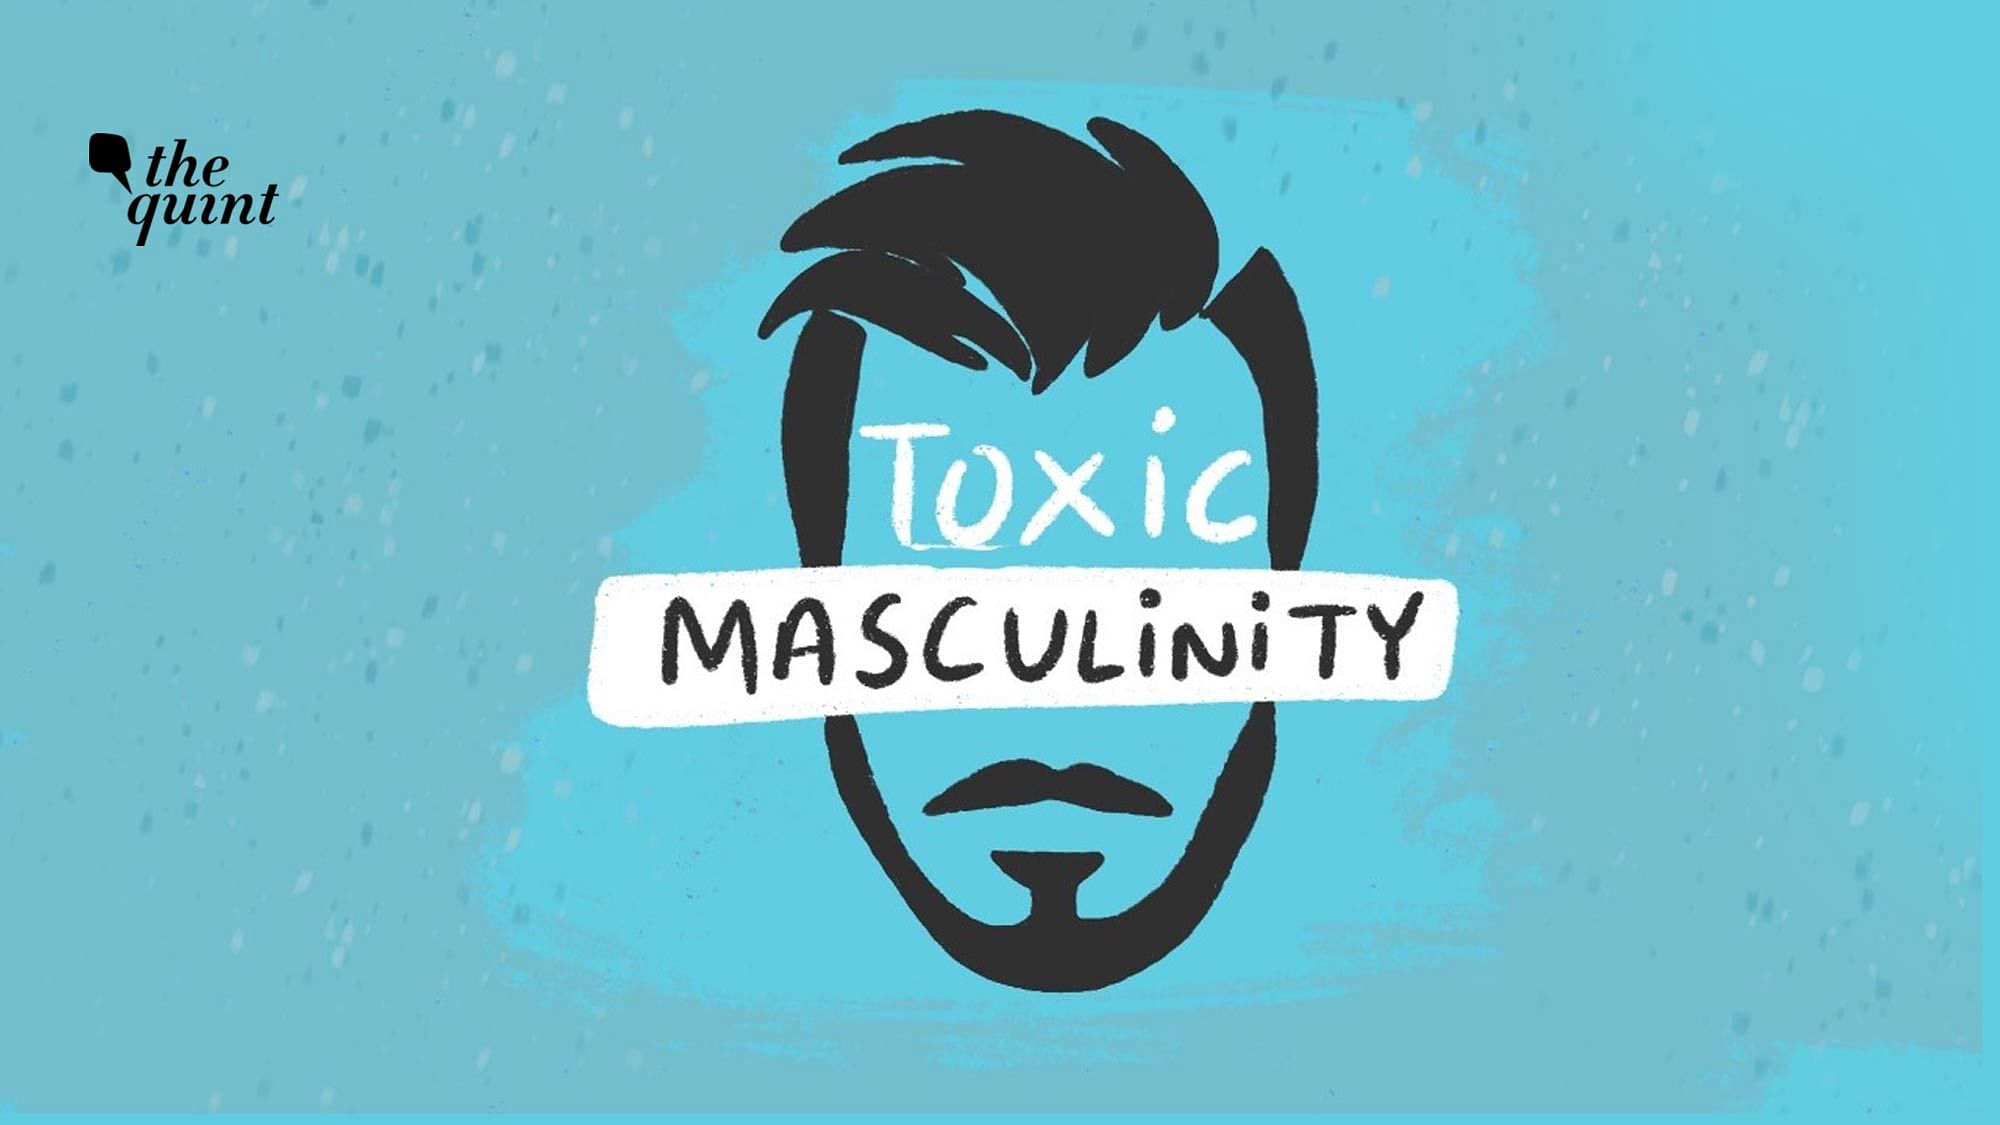 What Is Toxic Masculinity? - The New York Times